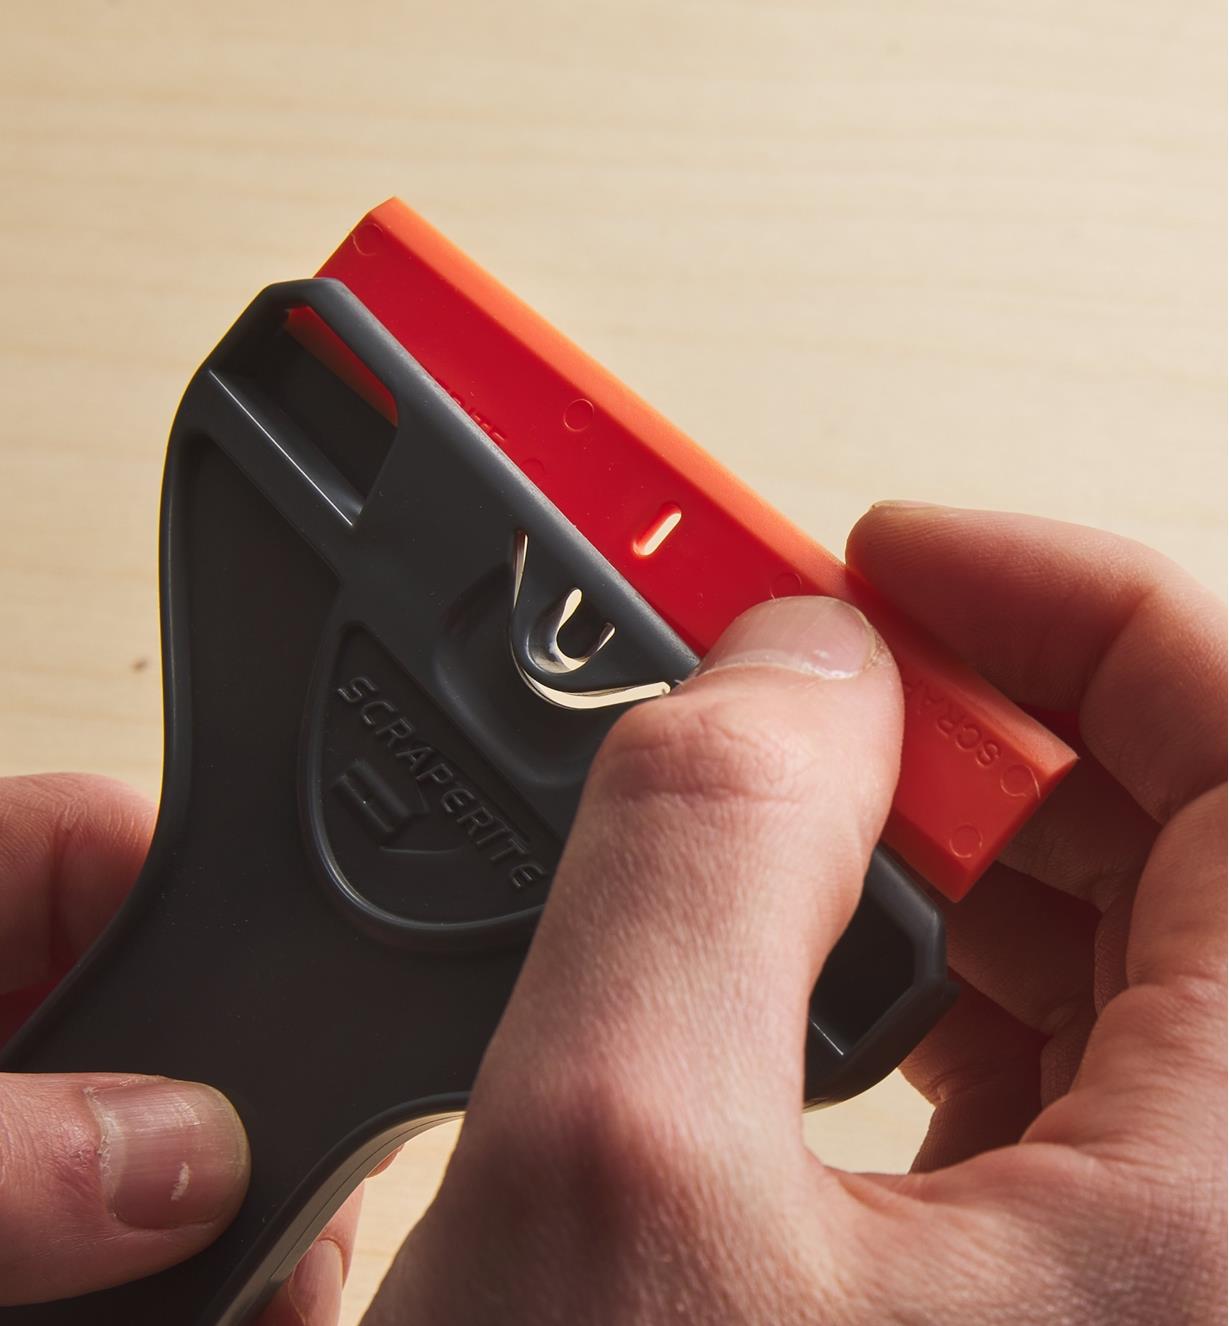 Placing a razor blade in a holder